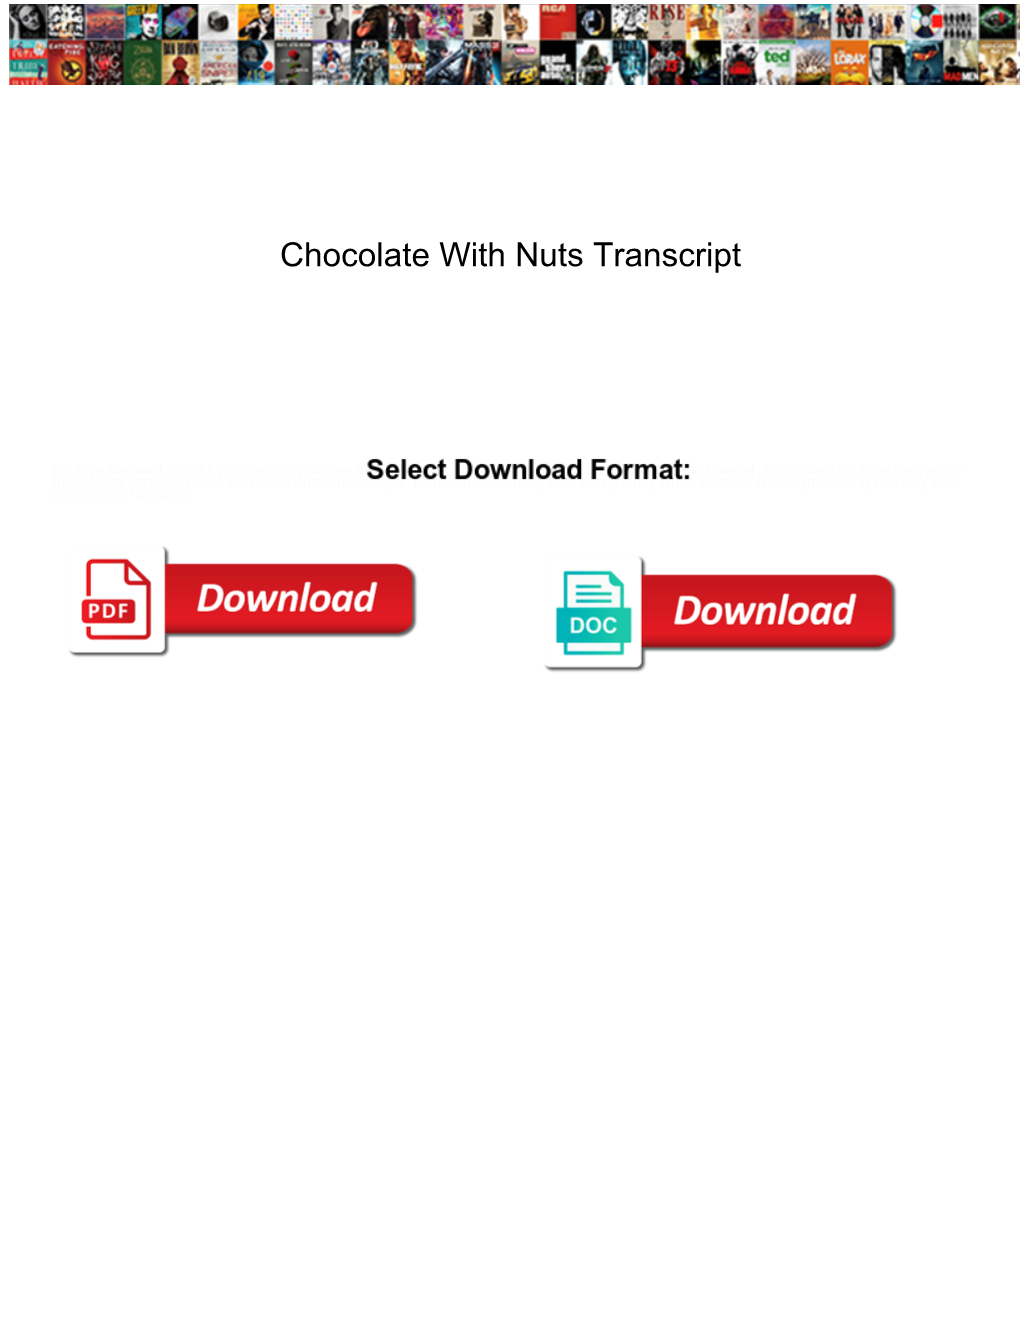 Chocolate with Nuts Transcript